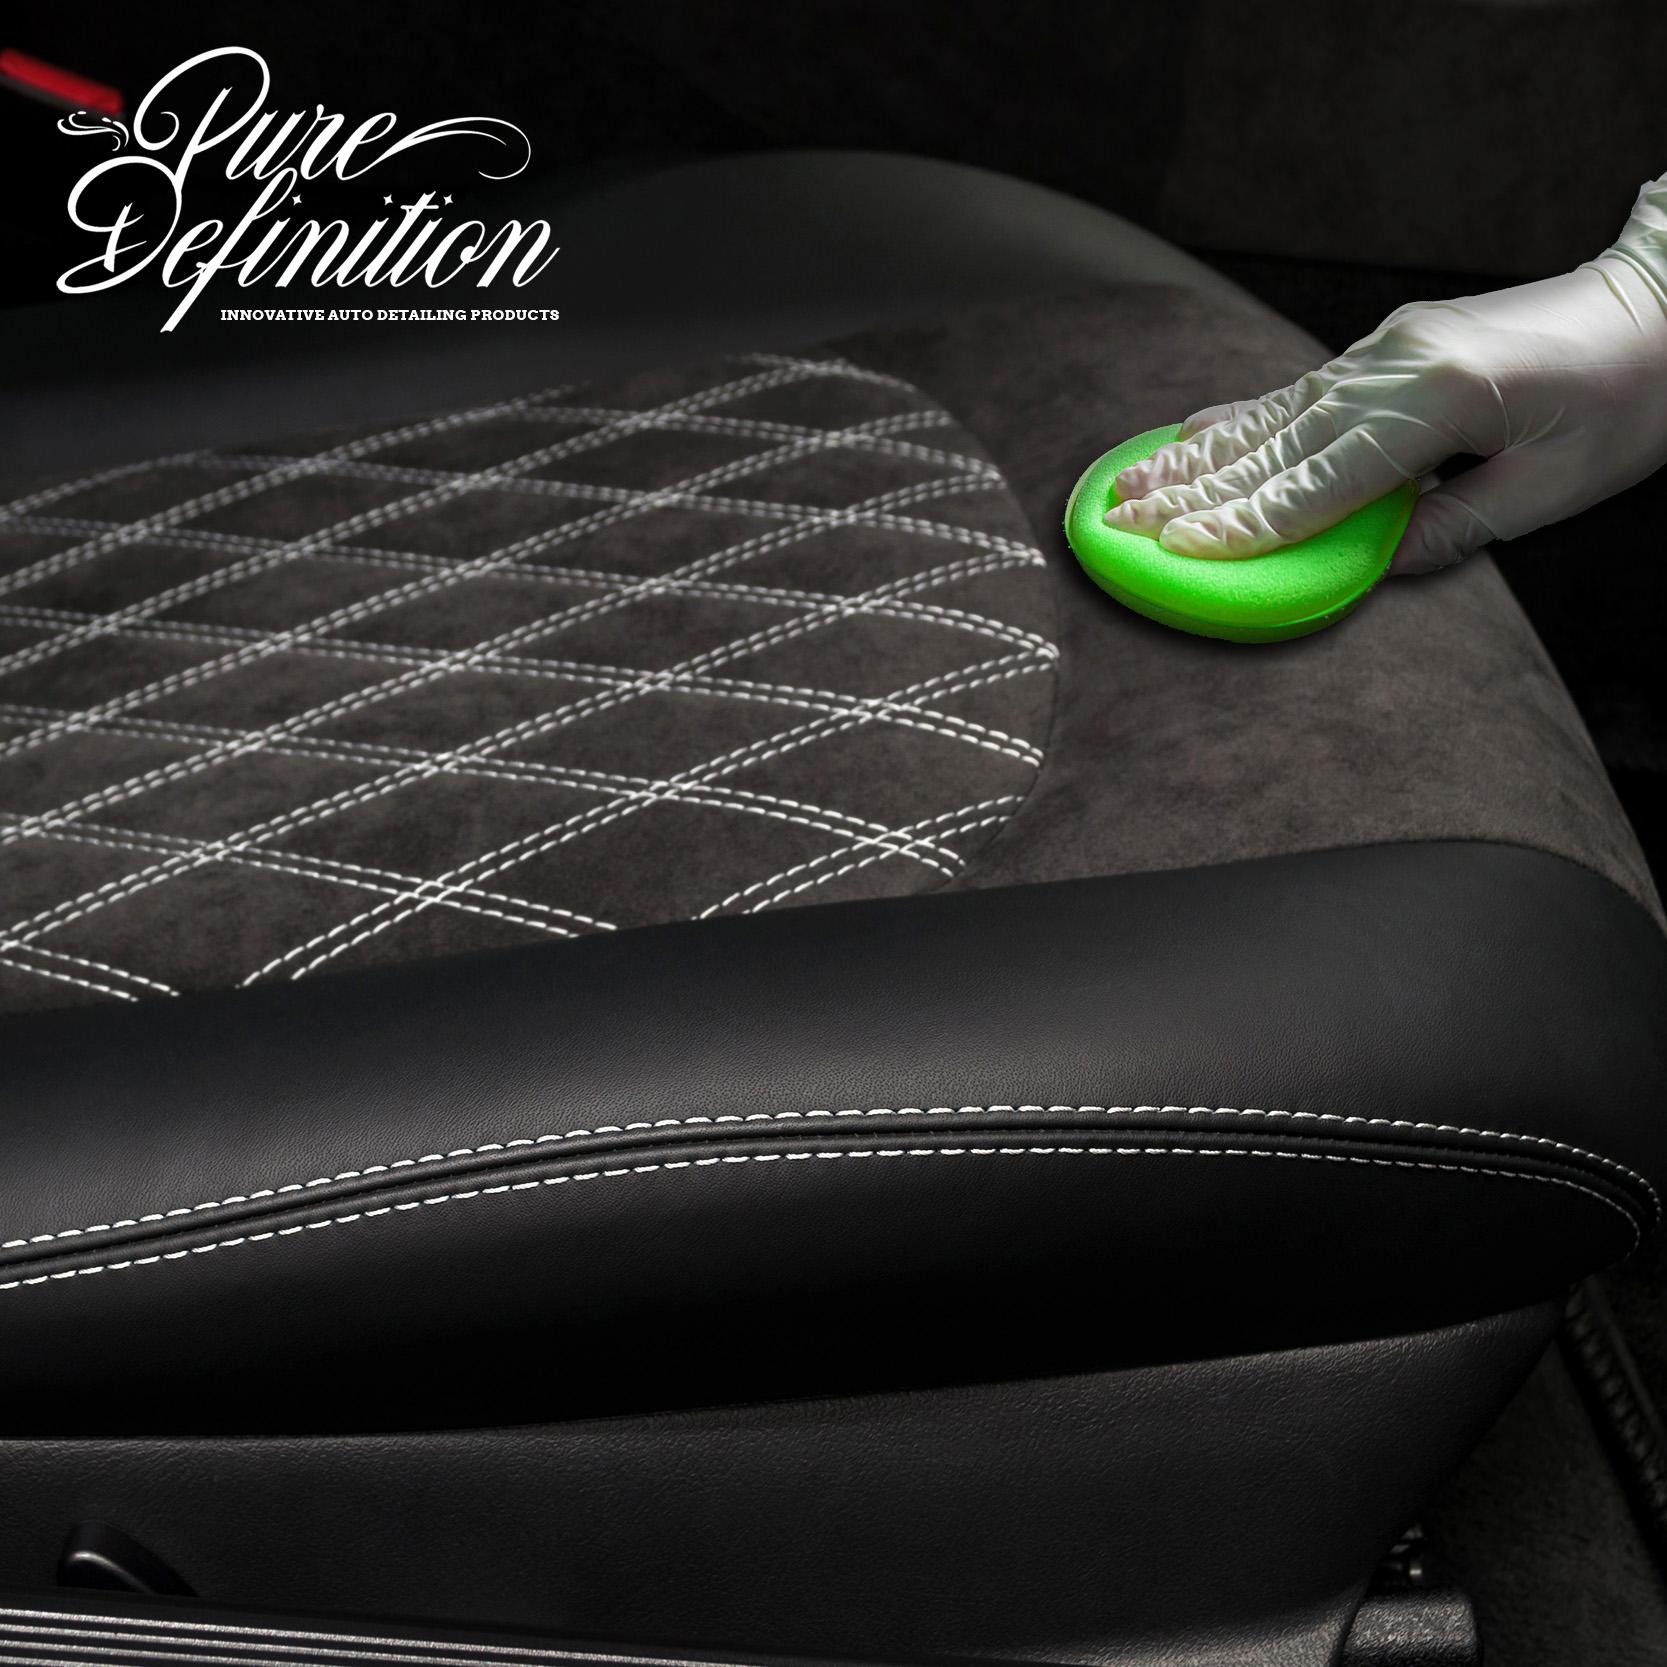 Complete Car Interior Detailing Kit | Pure Definition